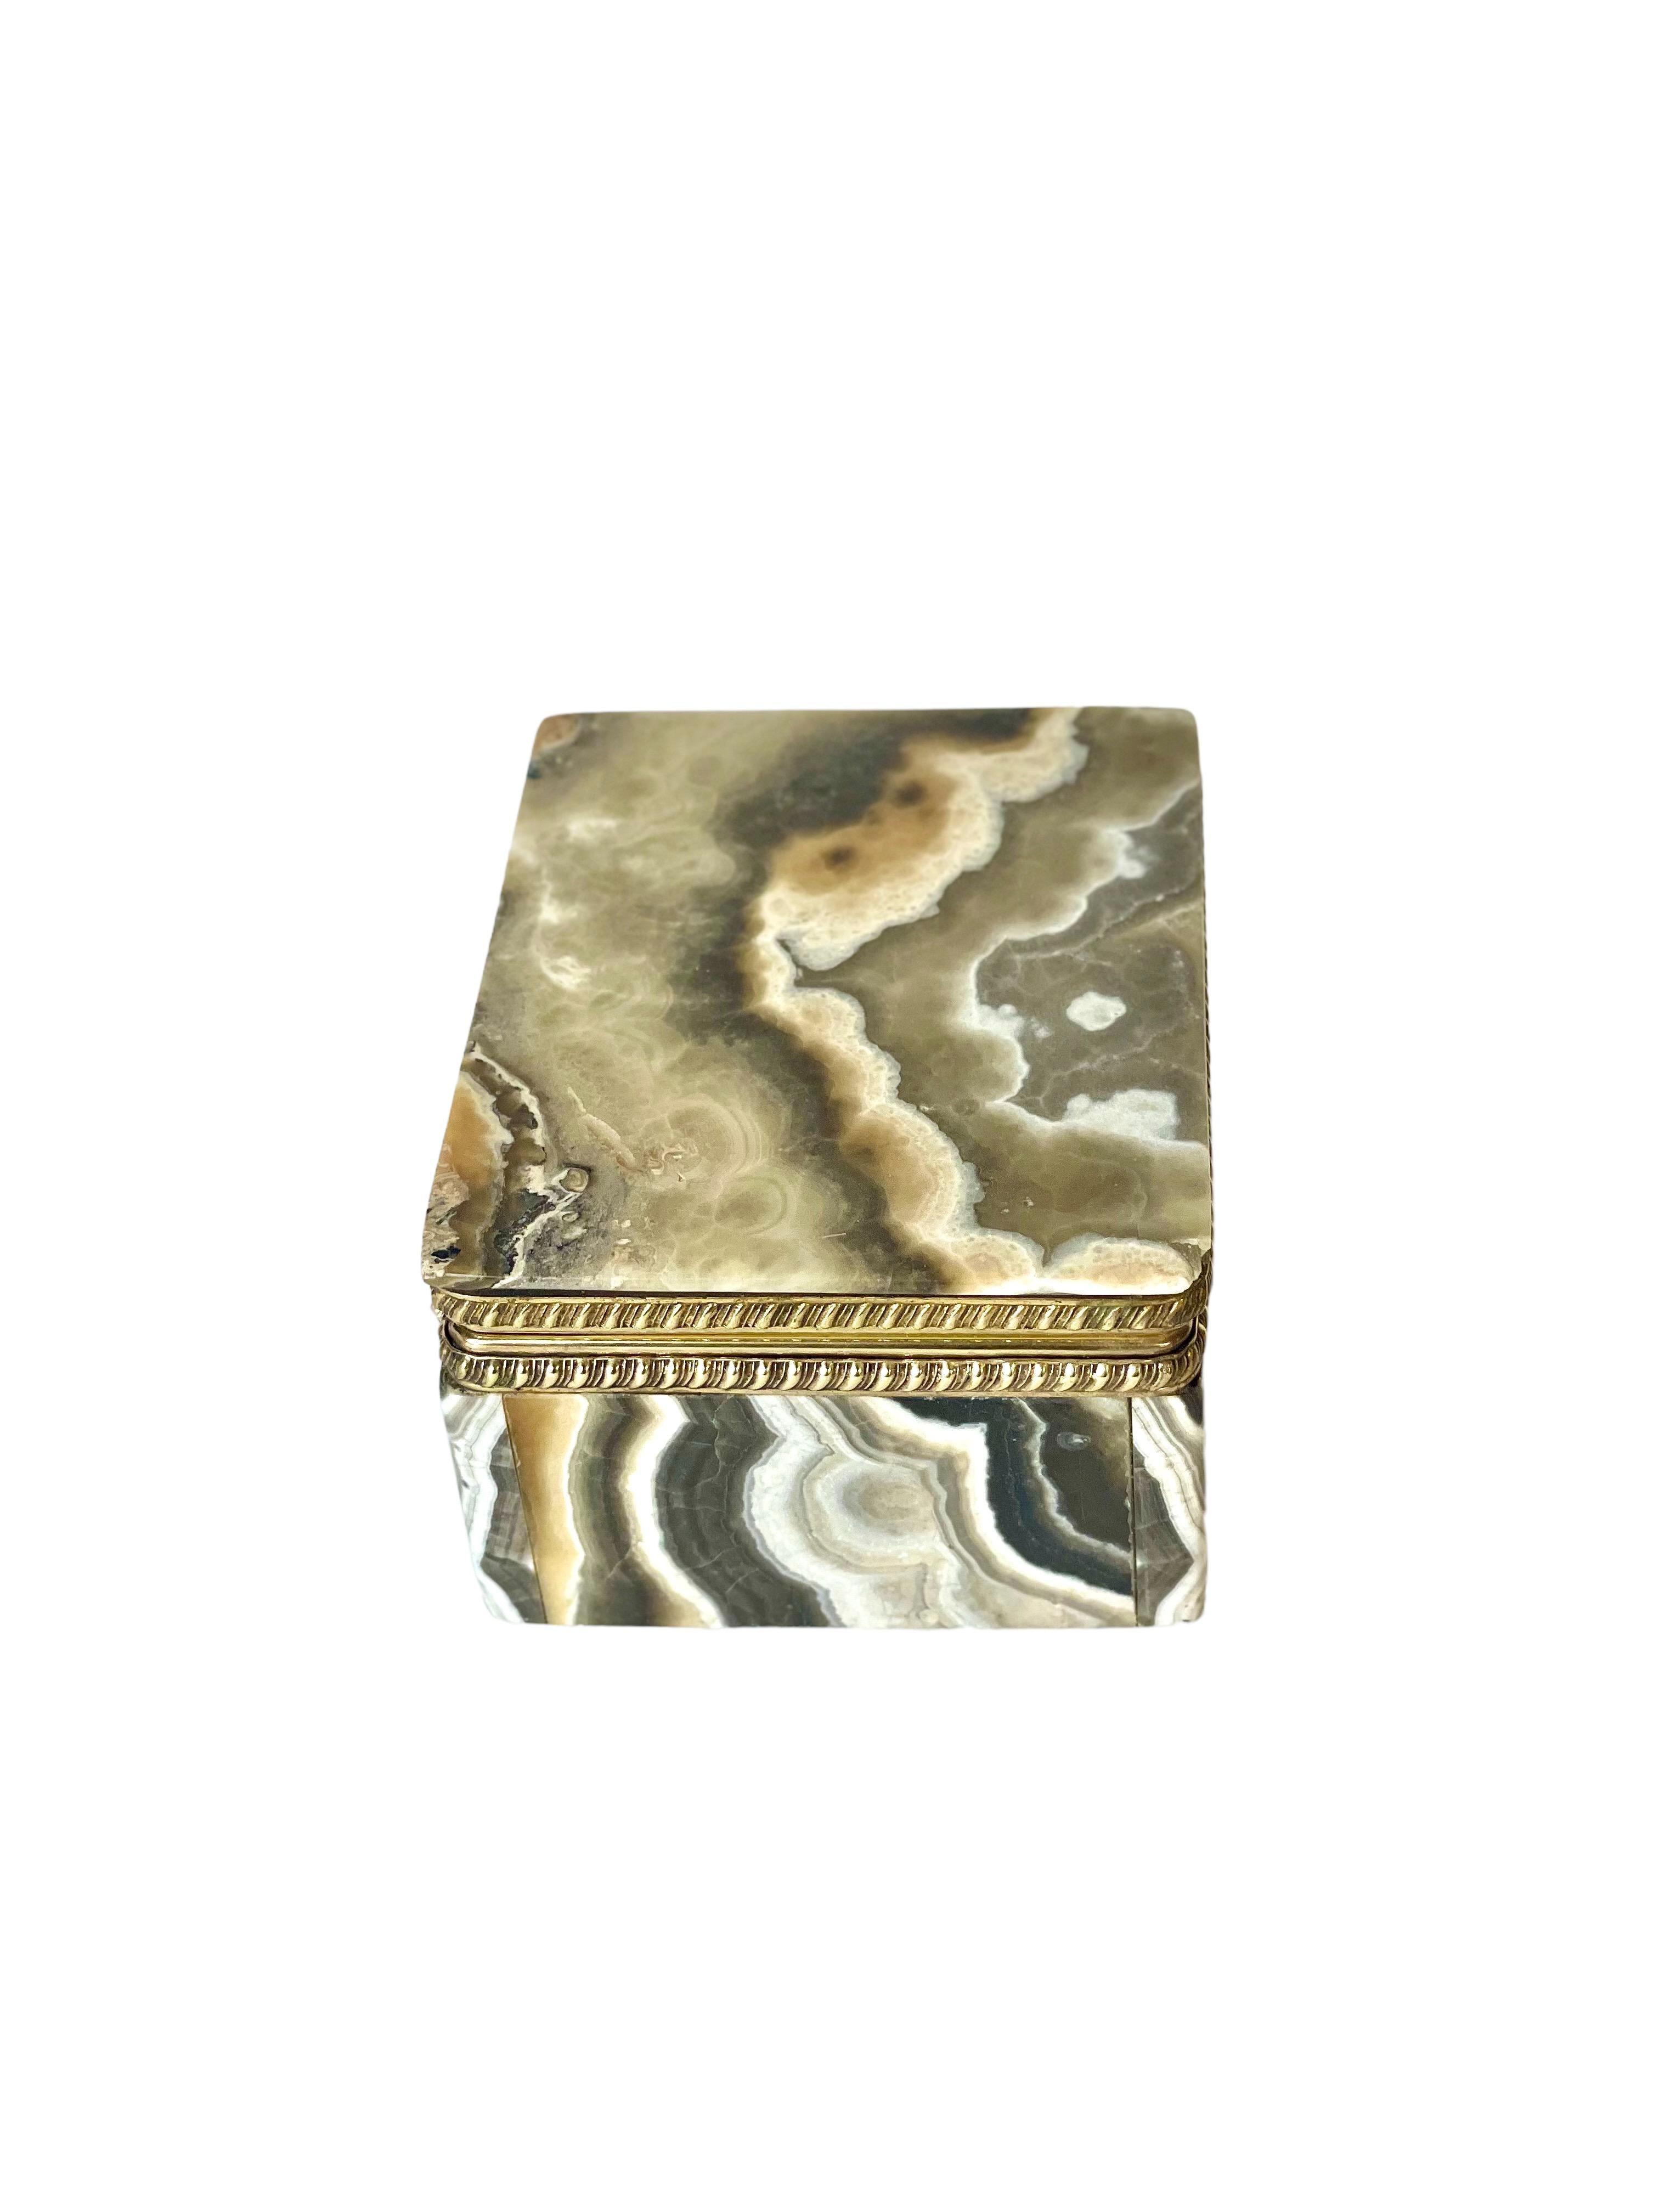 An attractive little Agate lidded jewelry, or trinket, box made by Christian Dior, decorated with a gadrooned frieze in gilt brass. Made from finely cut hard stone, this diminutive and very stylish casket would make an ideal place to store